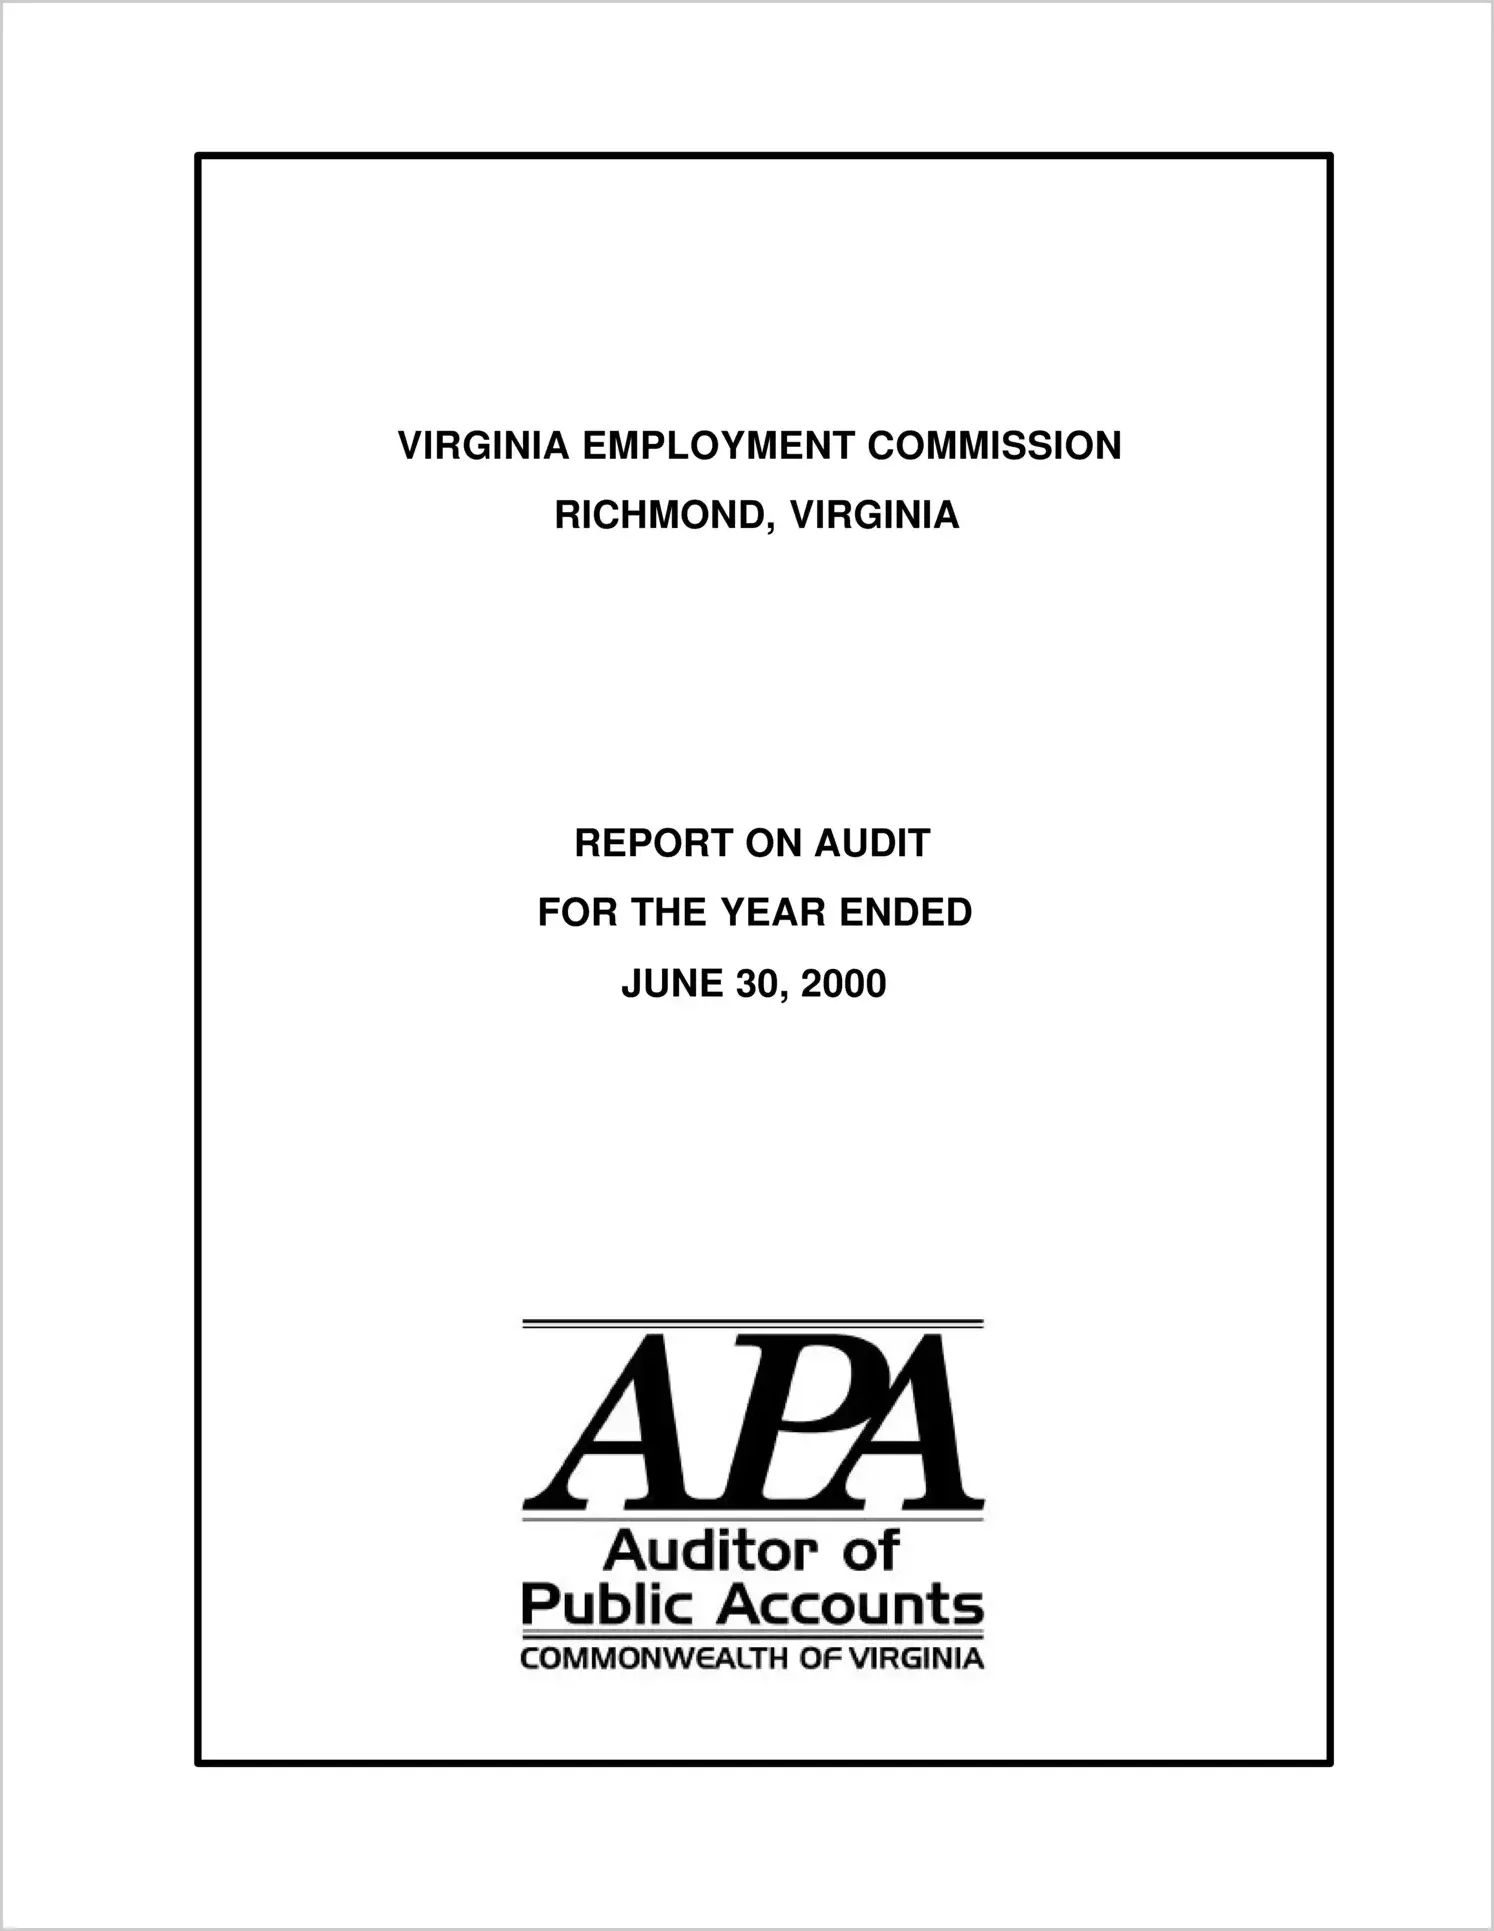 Virginia Employment Commission for the year ended June 30, 2000